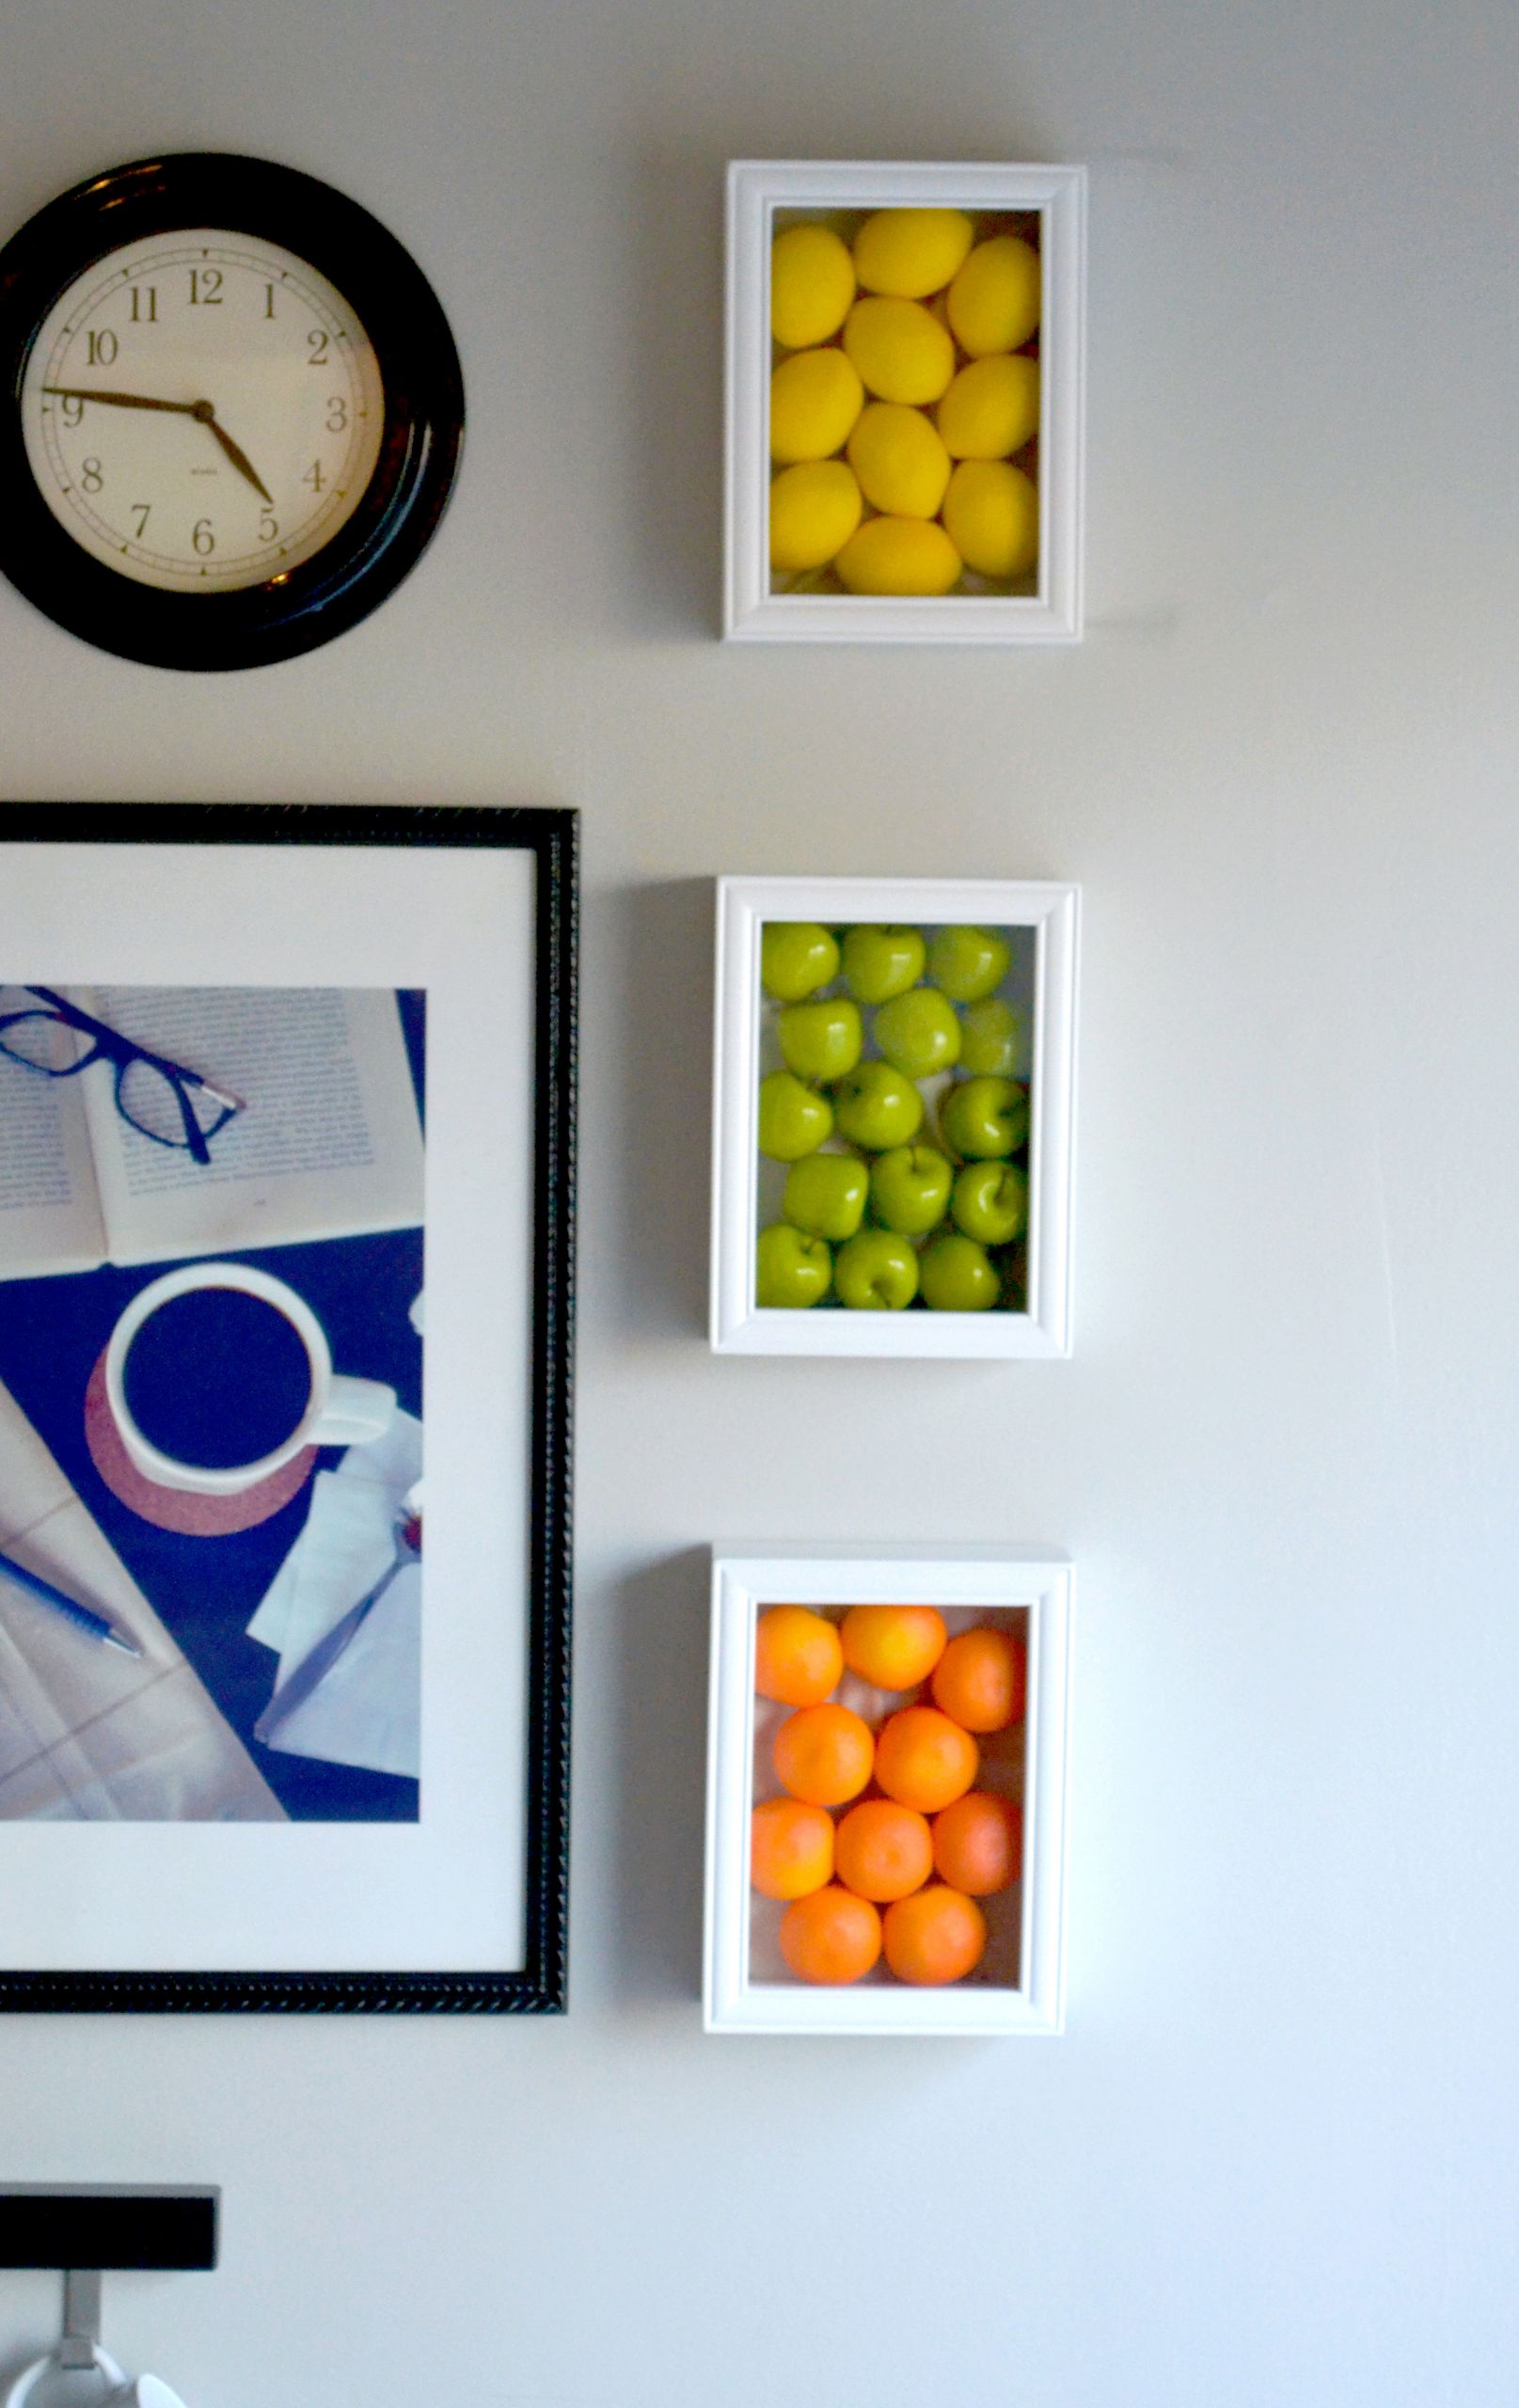 Kitchen Wall Art
 Colorful Kitchen Wall Art With Fake Fruits